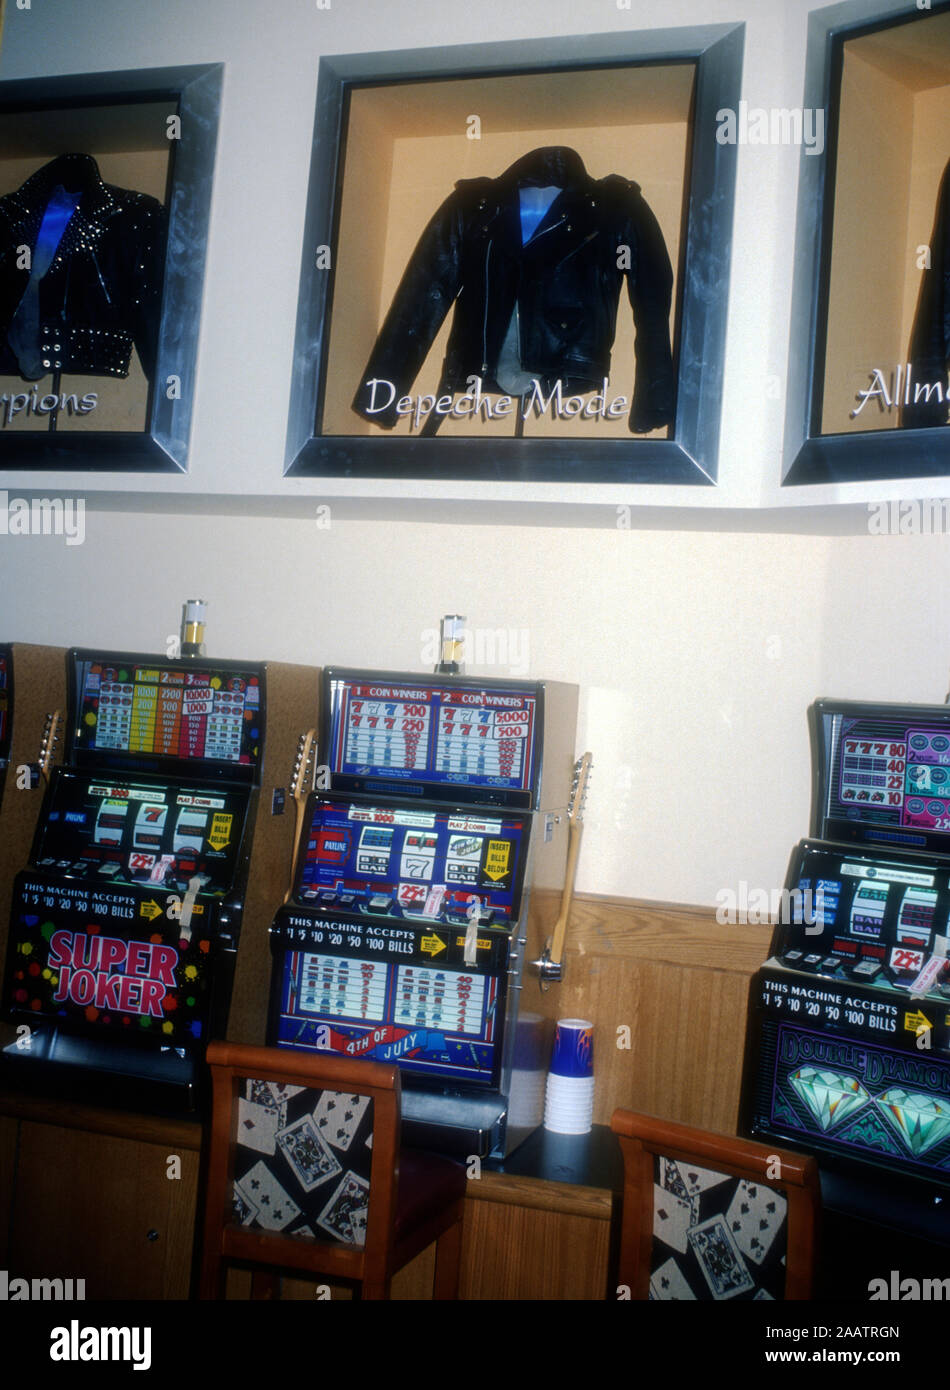 Las Vegas, Nevada, USA 11th March 1995 A general view of atmosphere of Depeche  Mode jacket at the Grand Opening Celebration of the Hard Rock Hotel hosted  by Peter Morgan on March